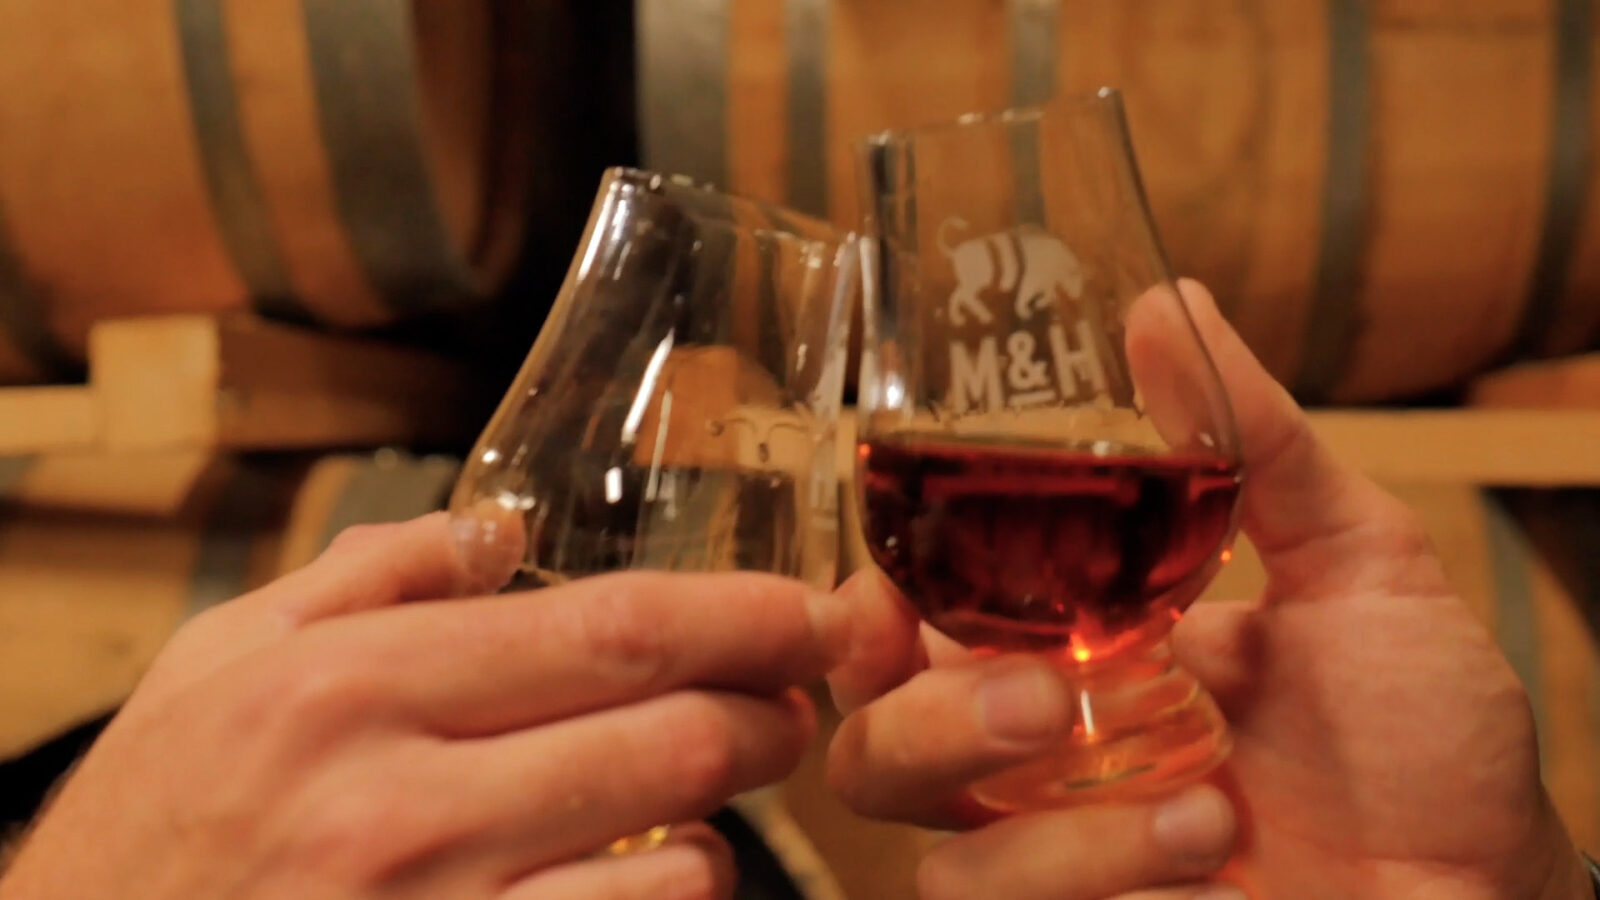 Raise a toast with award-winning whisky from the Land of Milk & Honey. Photo still from film